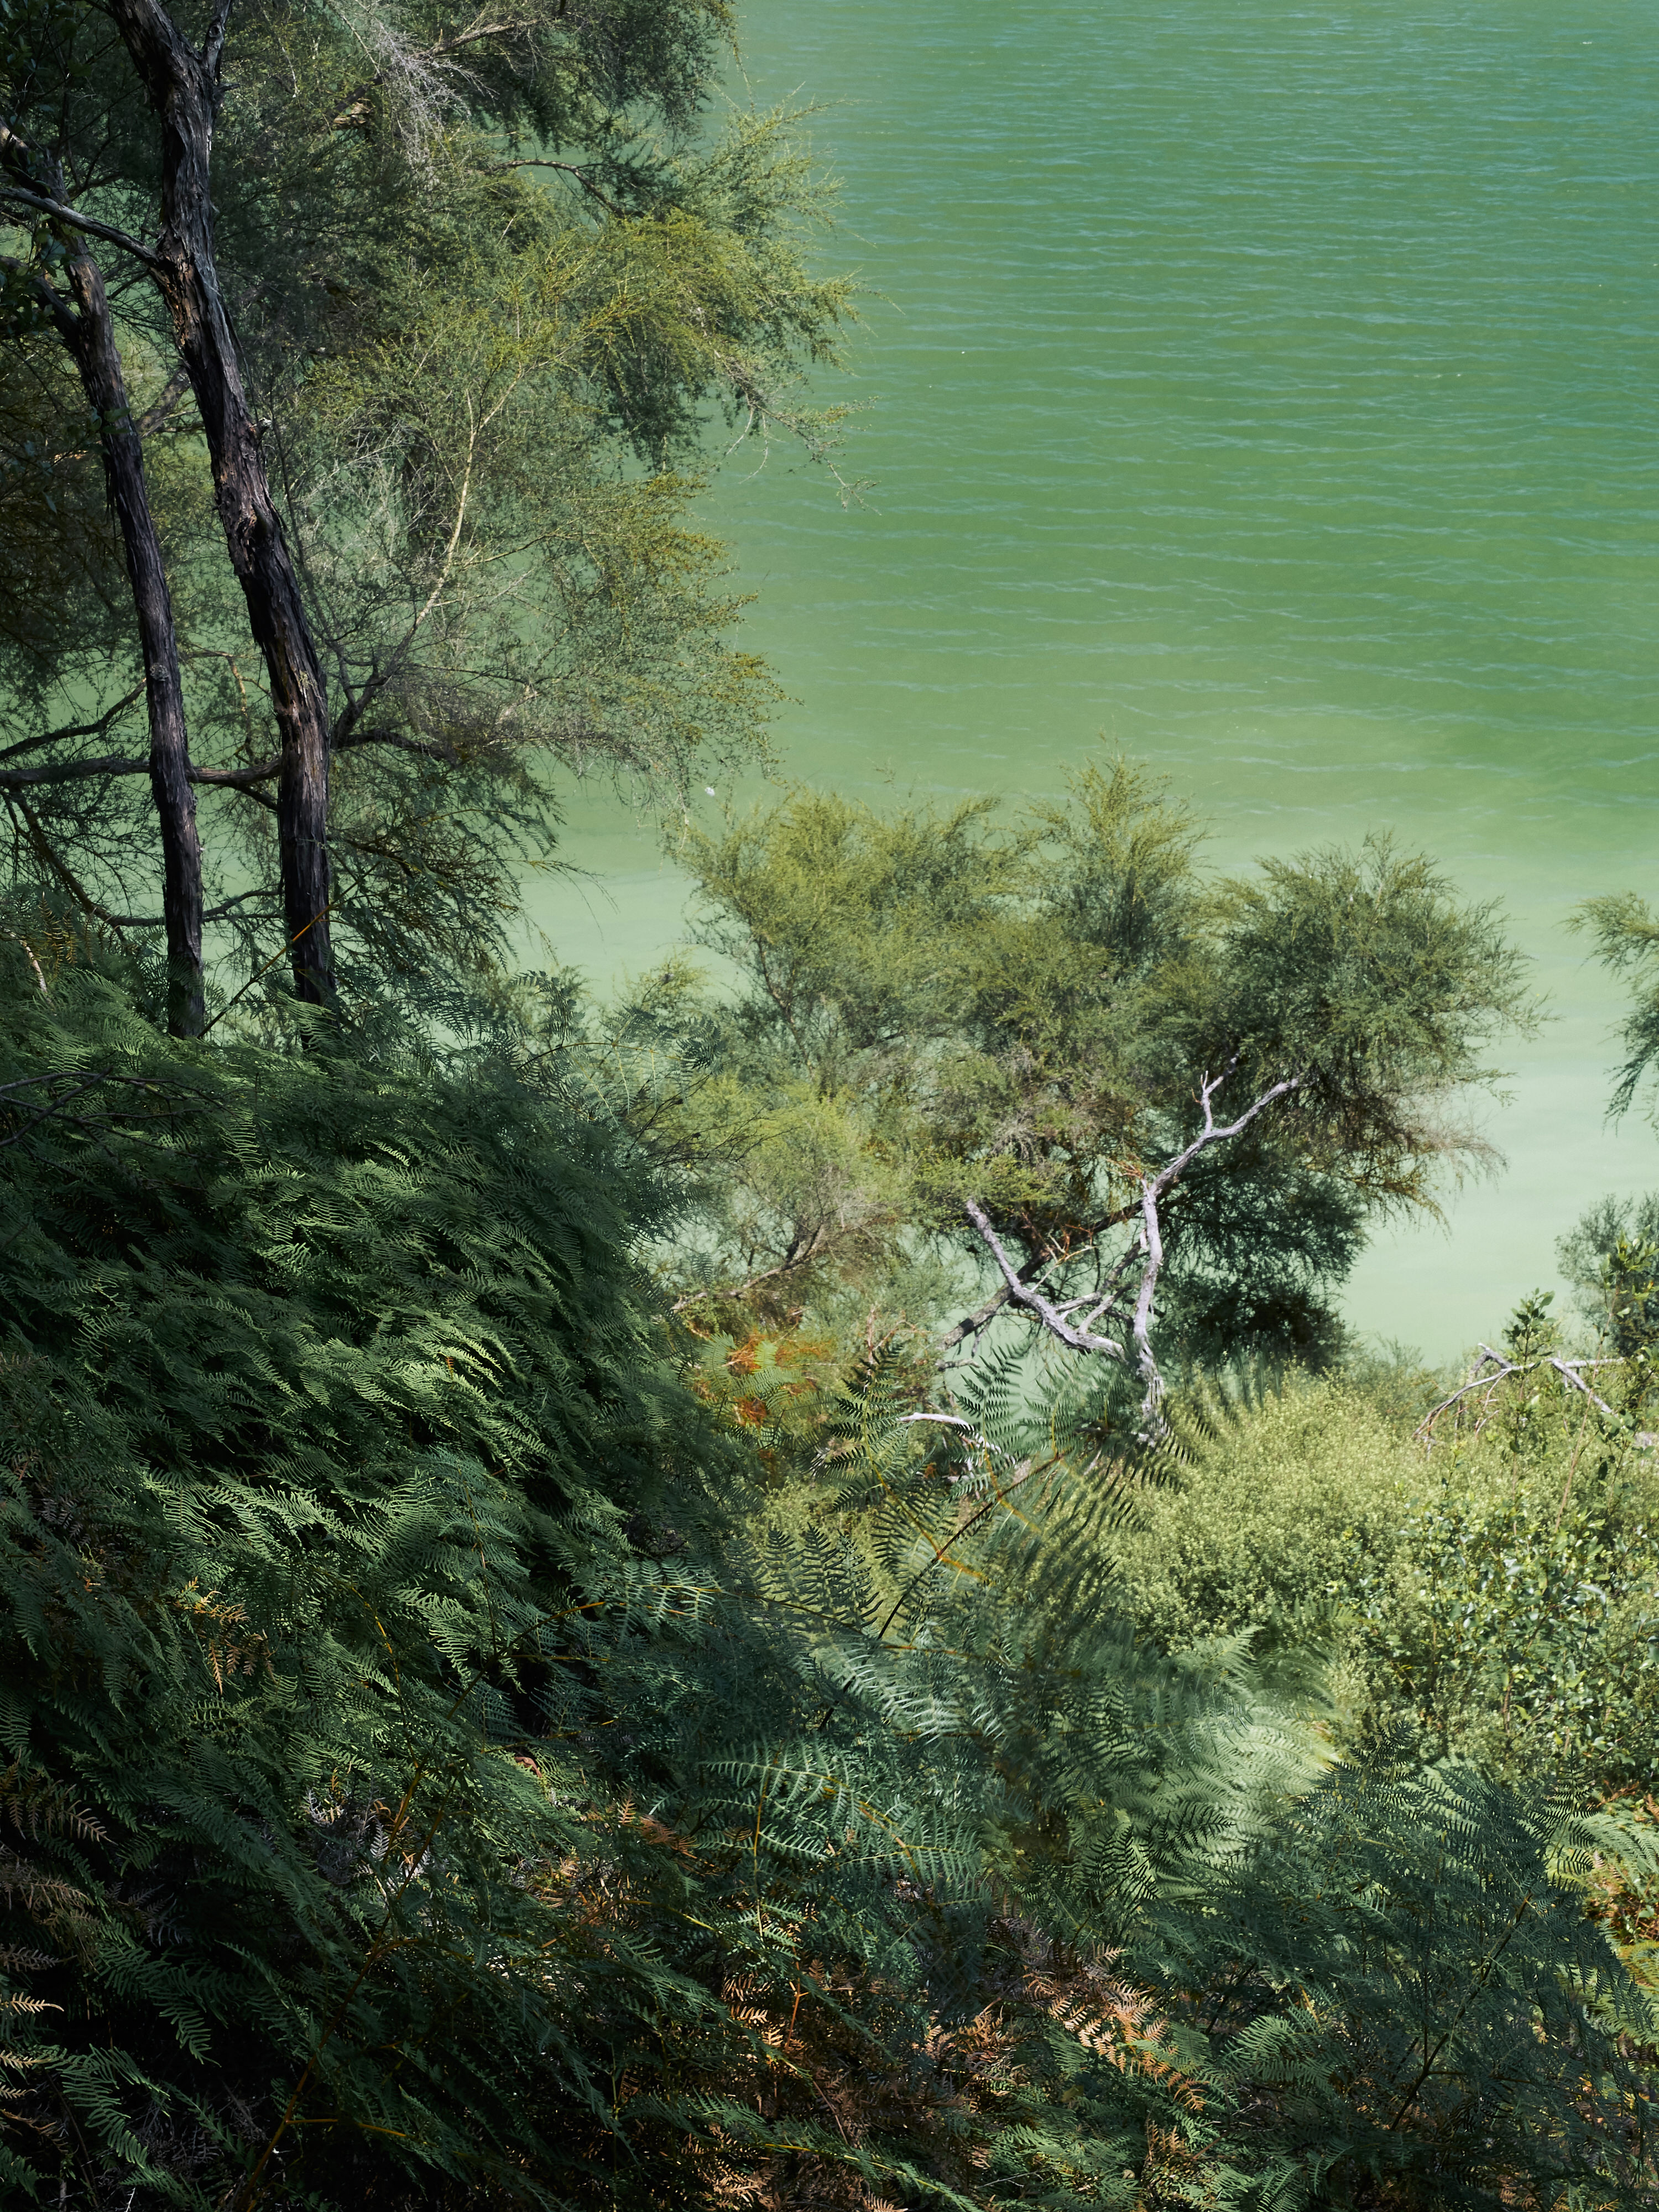 View over a lush forest to a very green lake